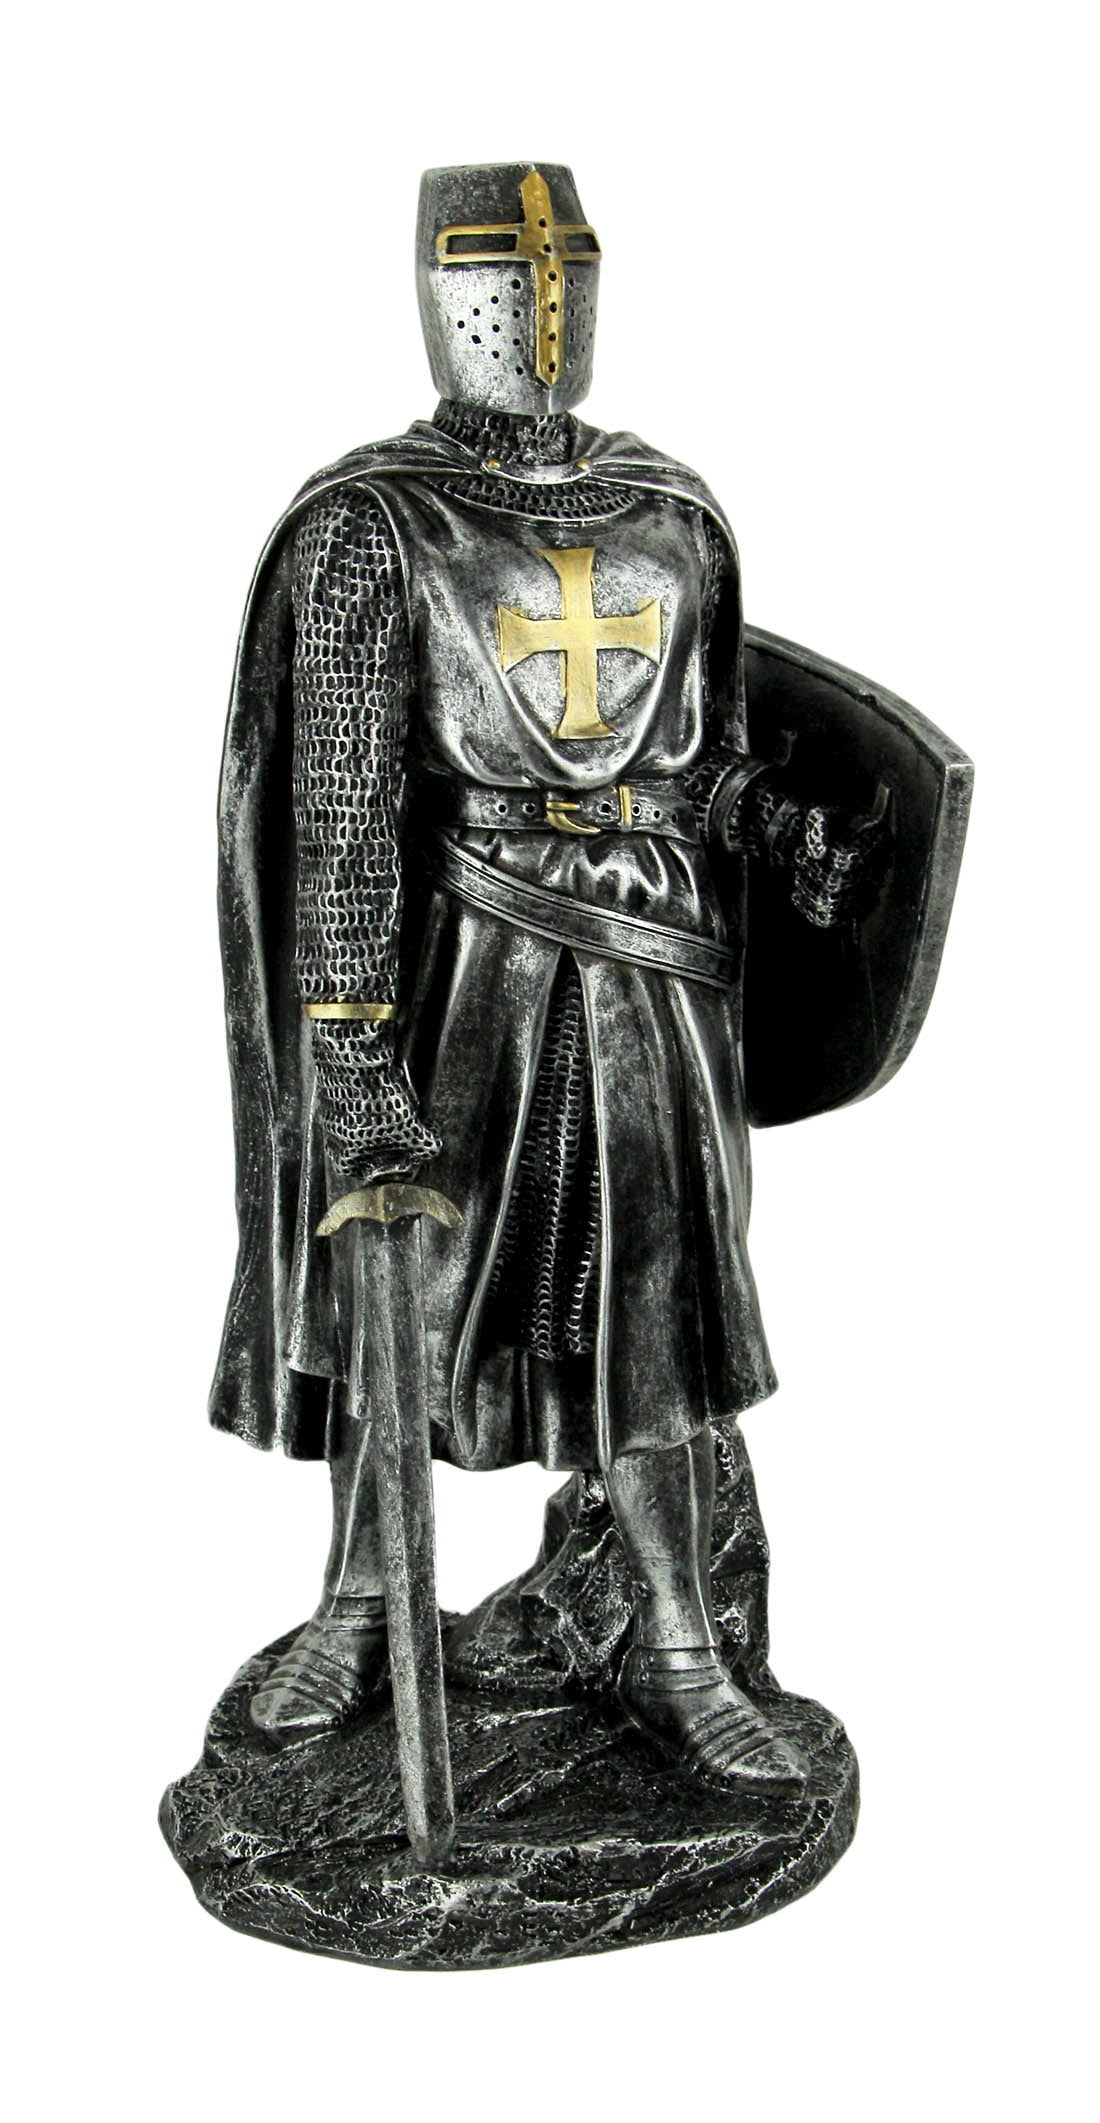 Details about   Crusades Knight Crusader Toy soldier 54 mm figurine metal sculpture 